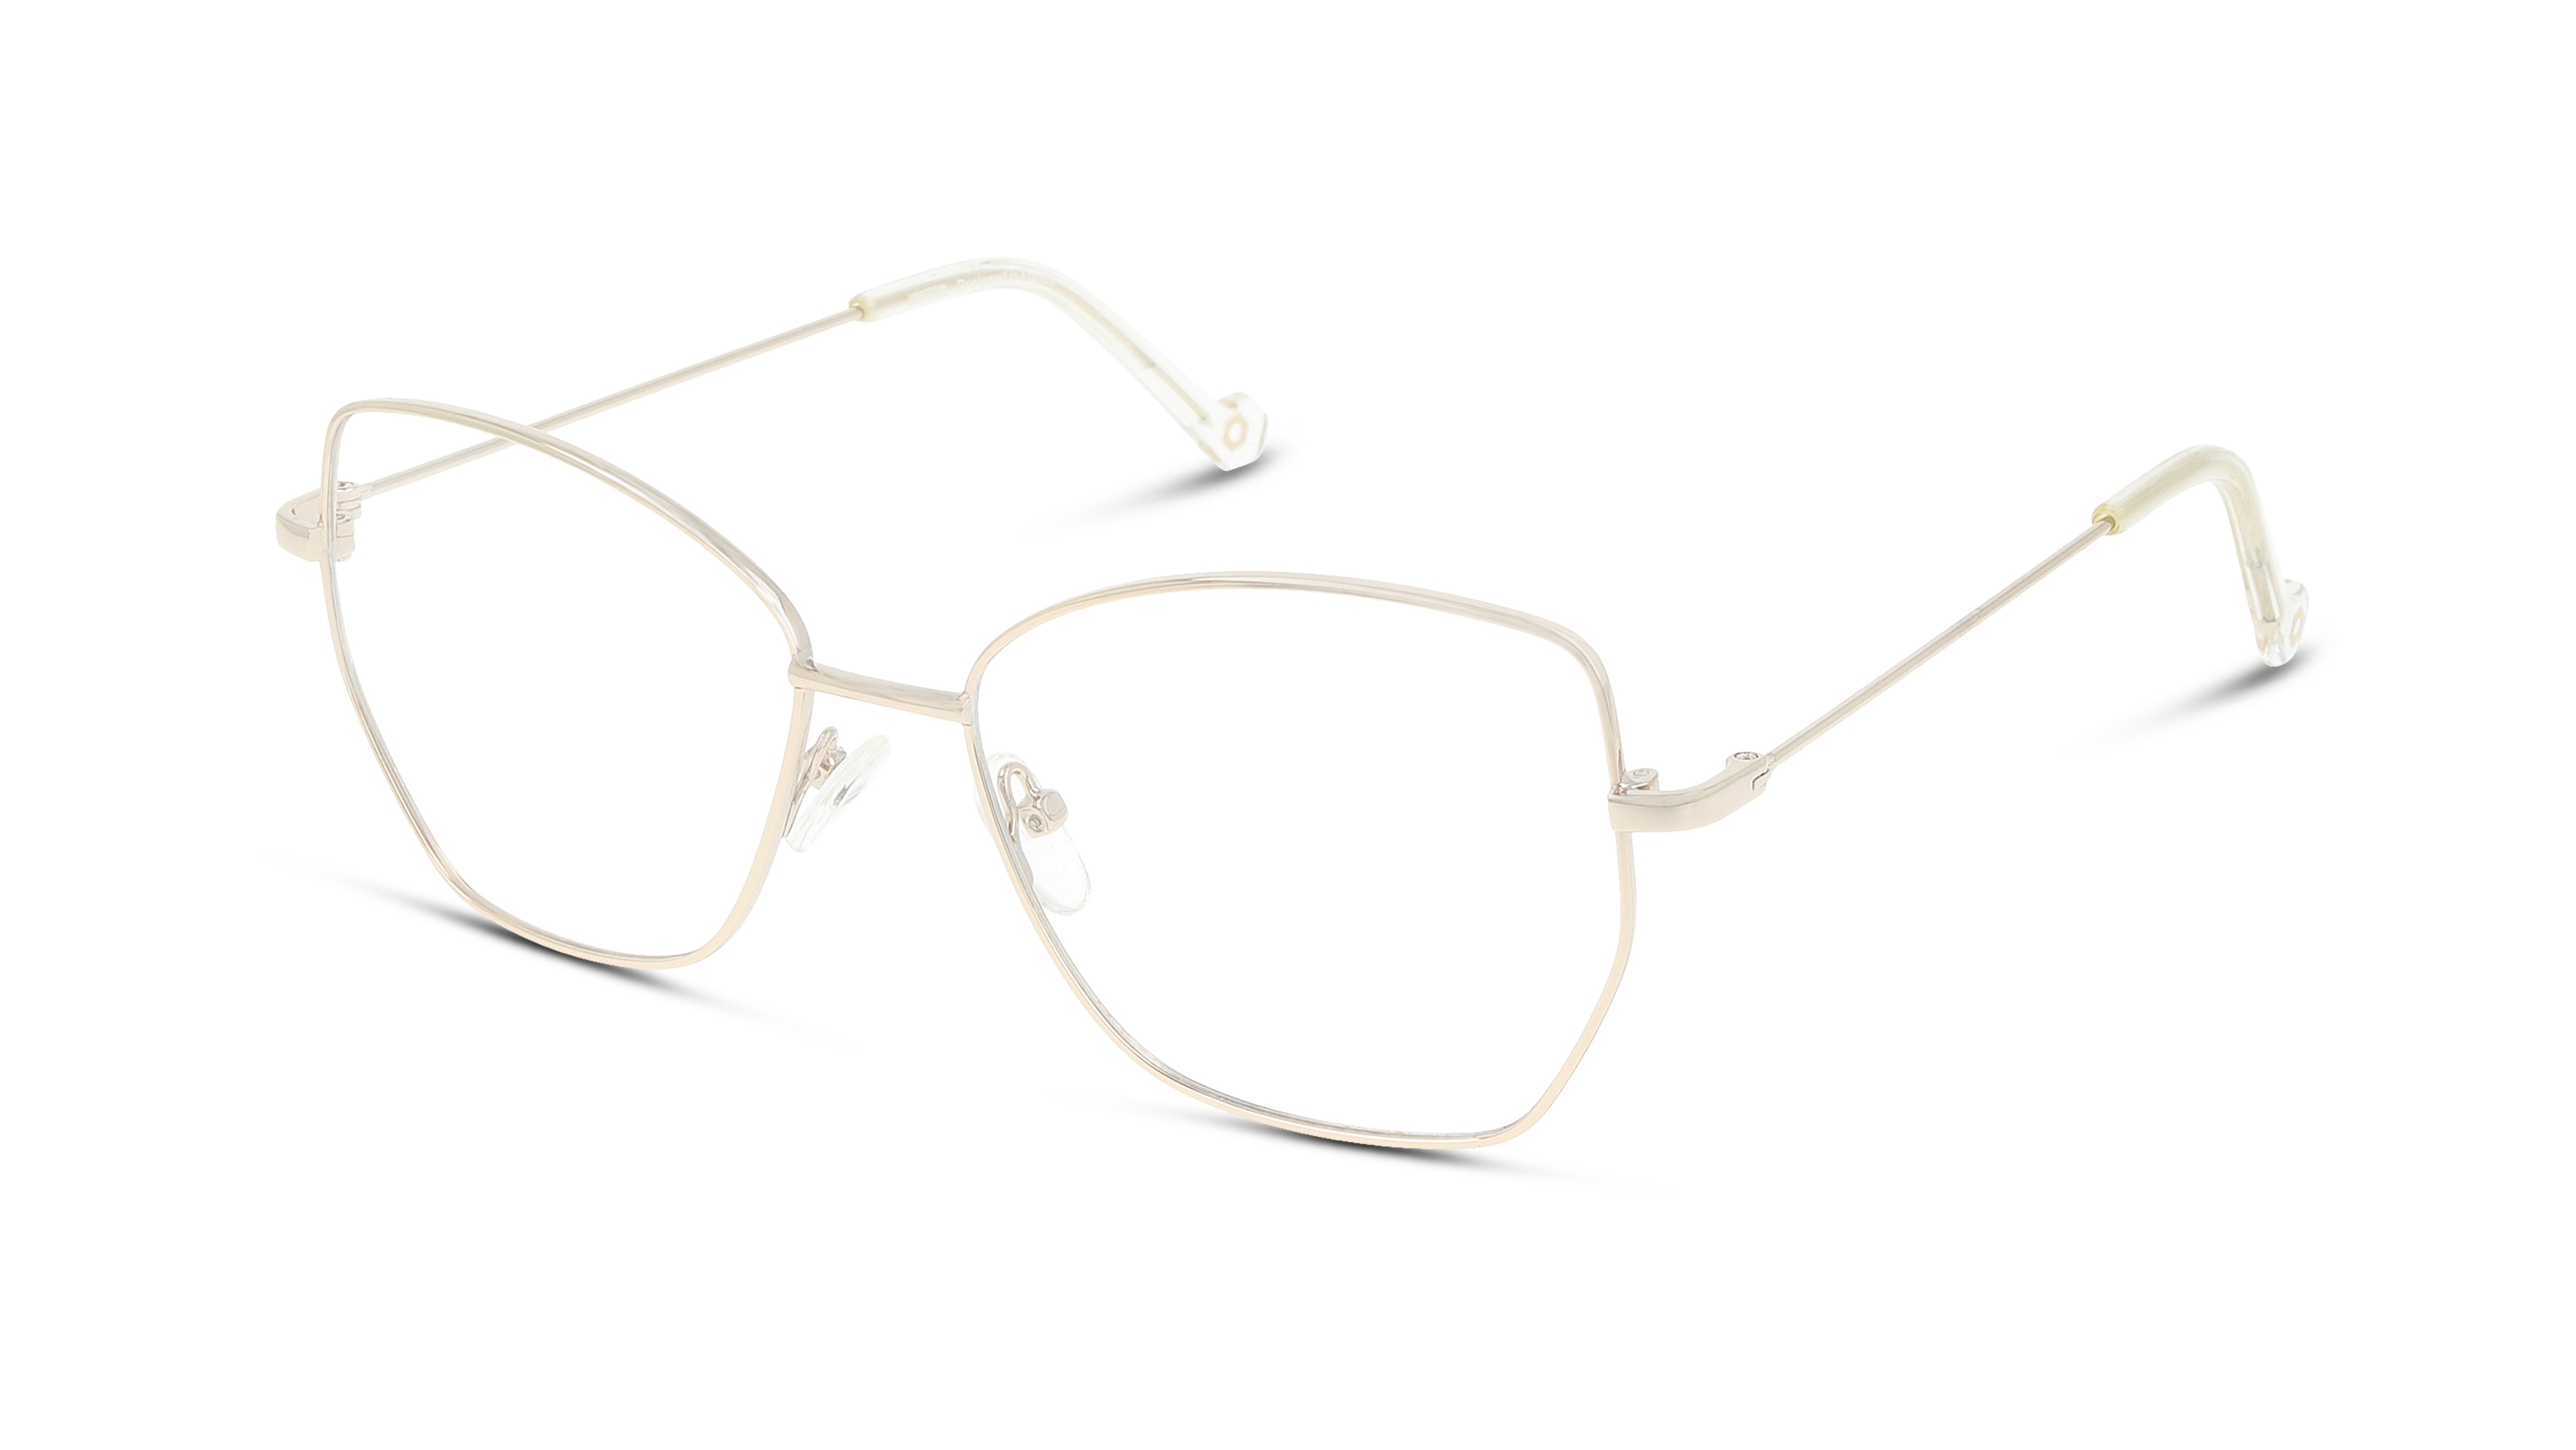 Angle_Left01 UNOFFICIAL UNOF0078 DD00 Brille Goldfarben